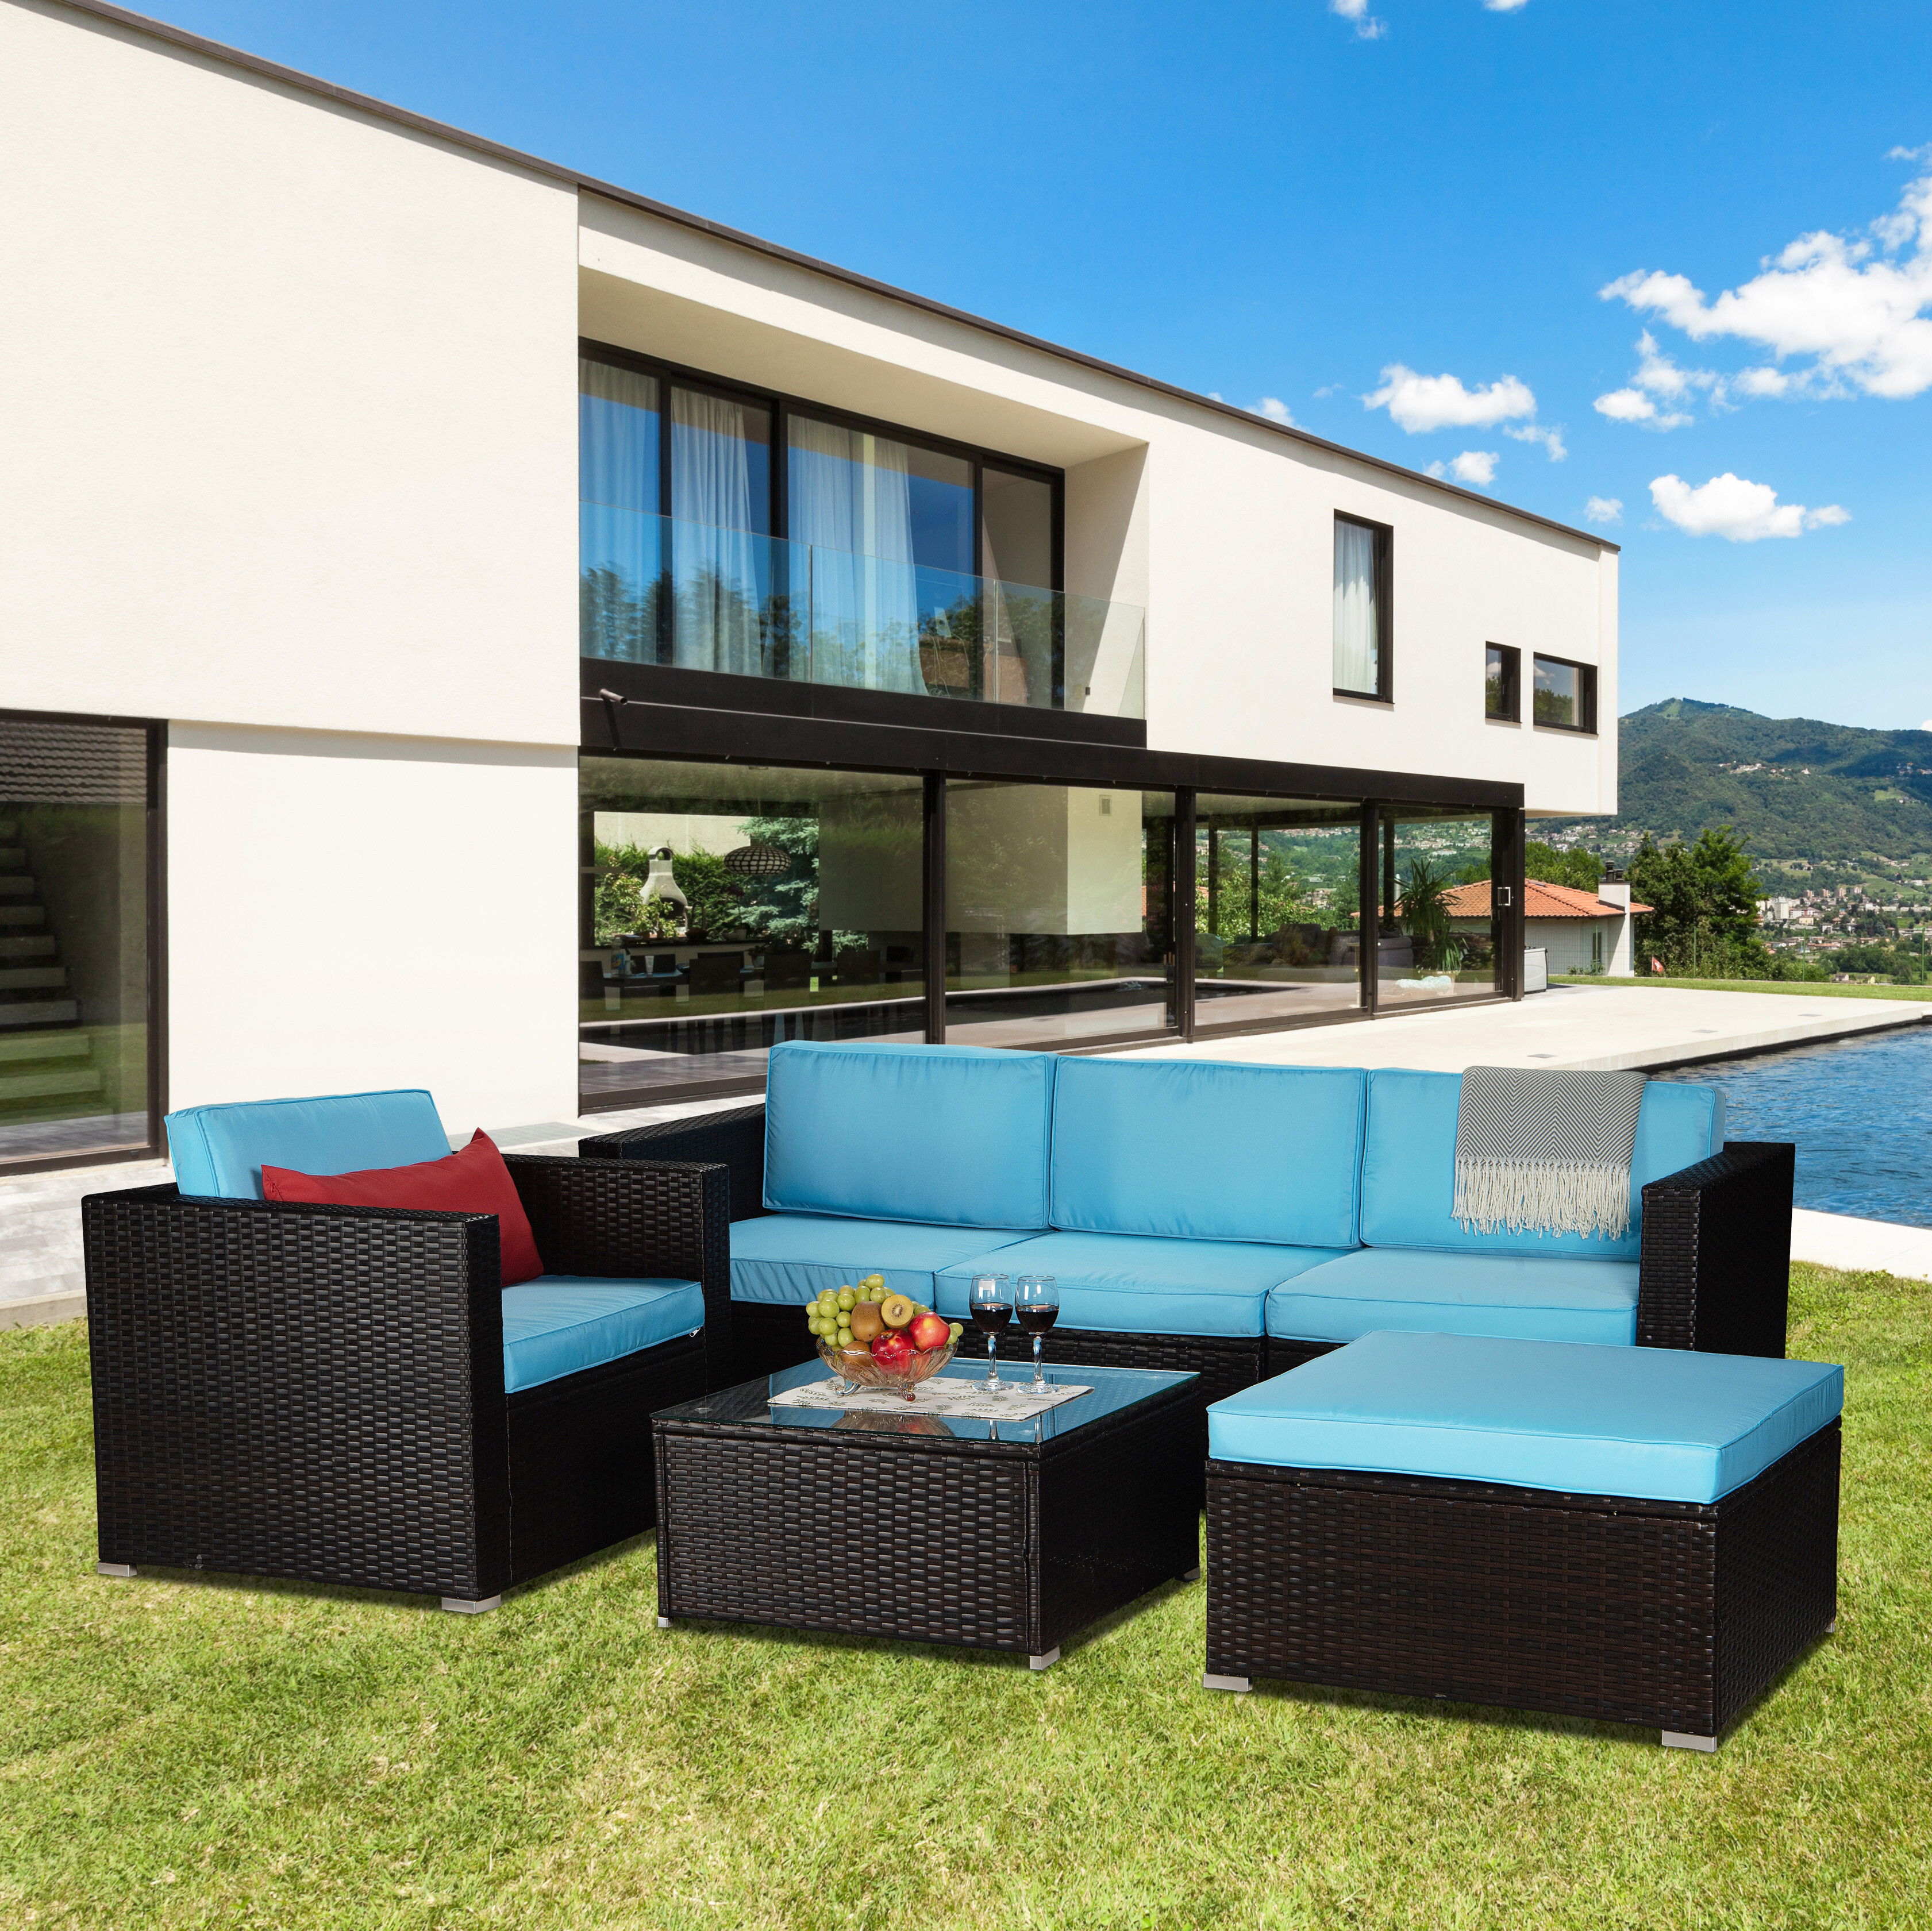 6-Piece Outdoor Patio Furniture Set PE Rattan Wicker Sectional Sofa Set with Coffee Table, Blue Cushioned and Red Pillow - image 2 of 8